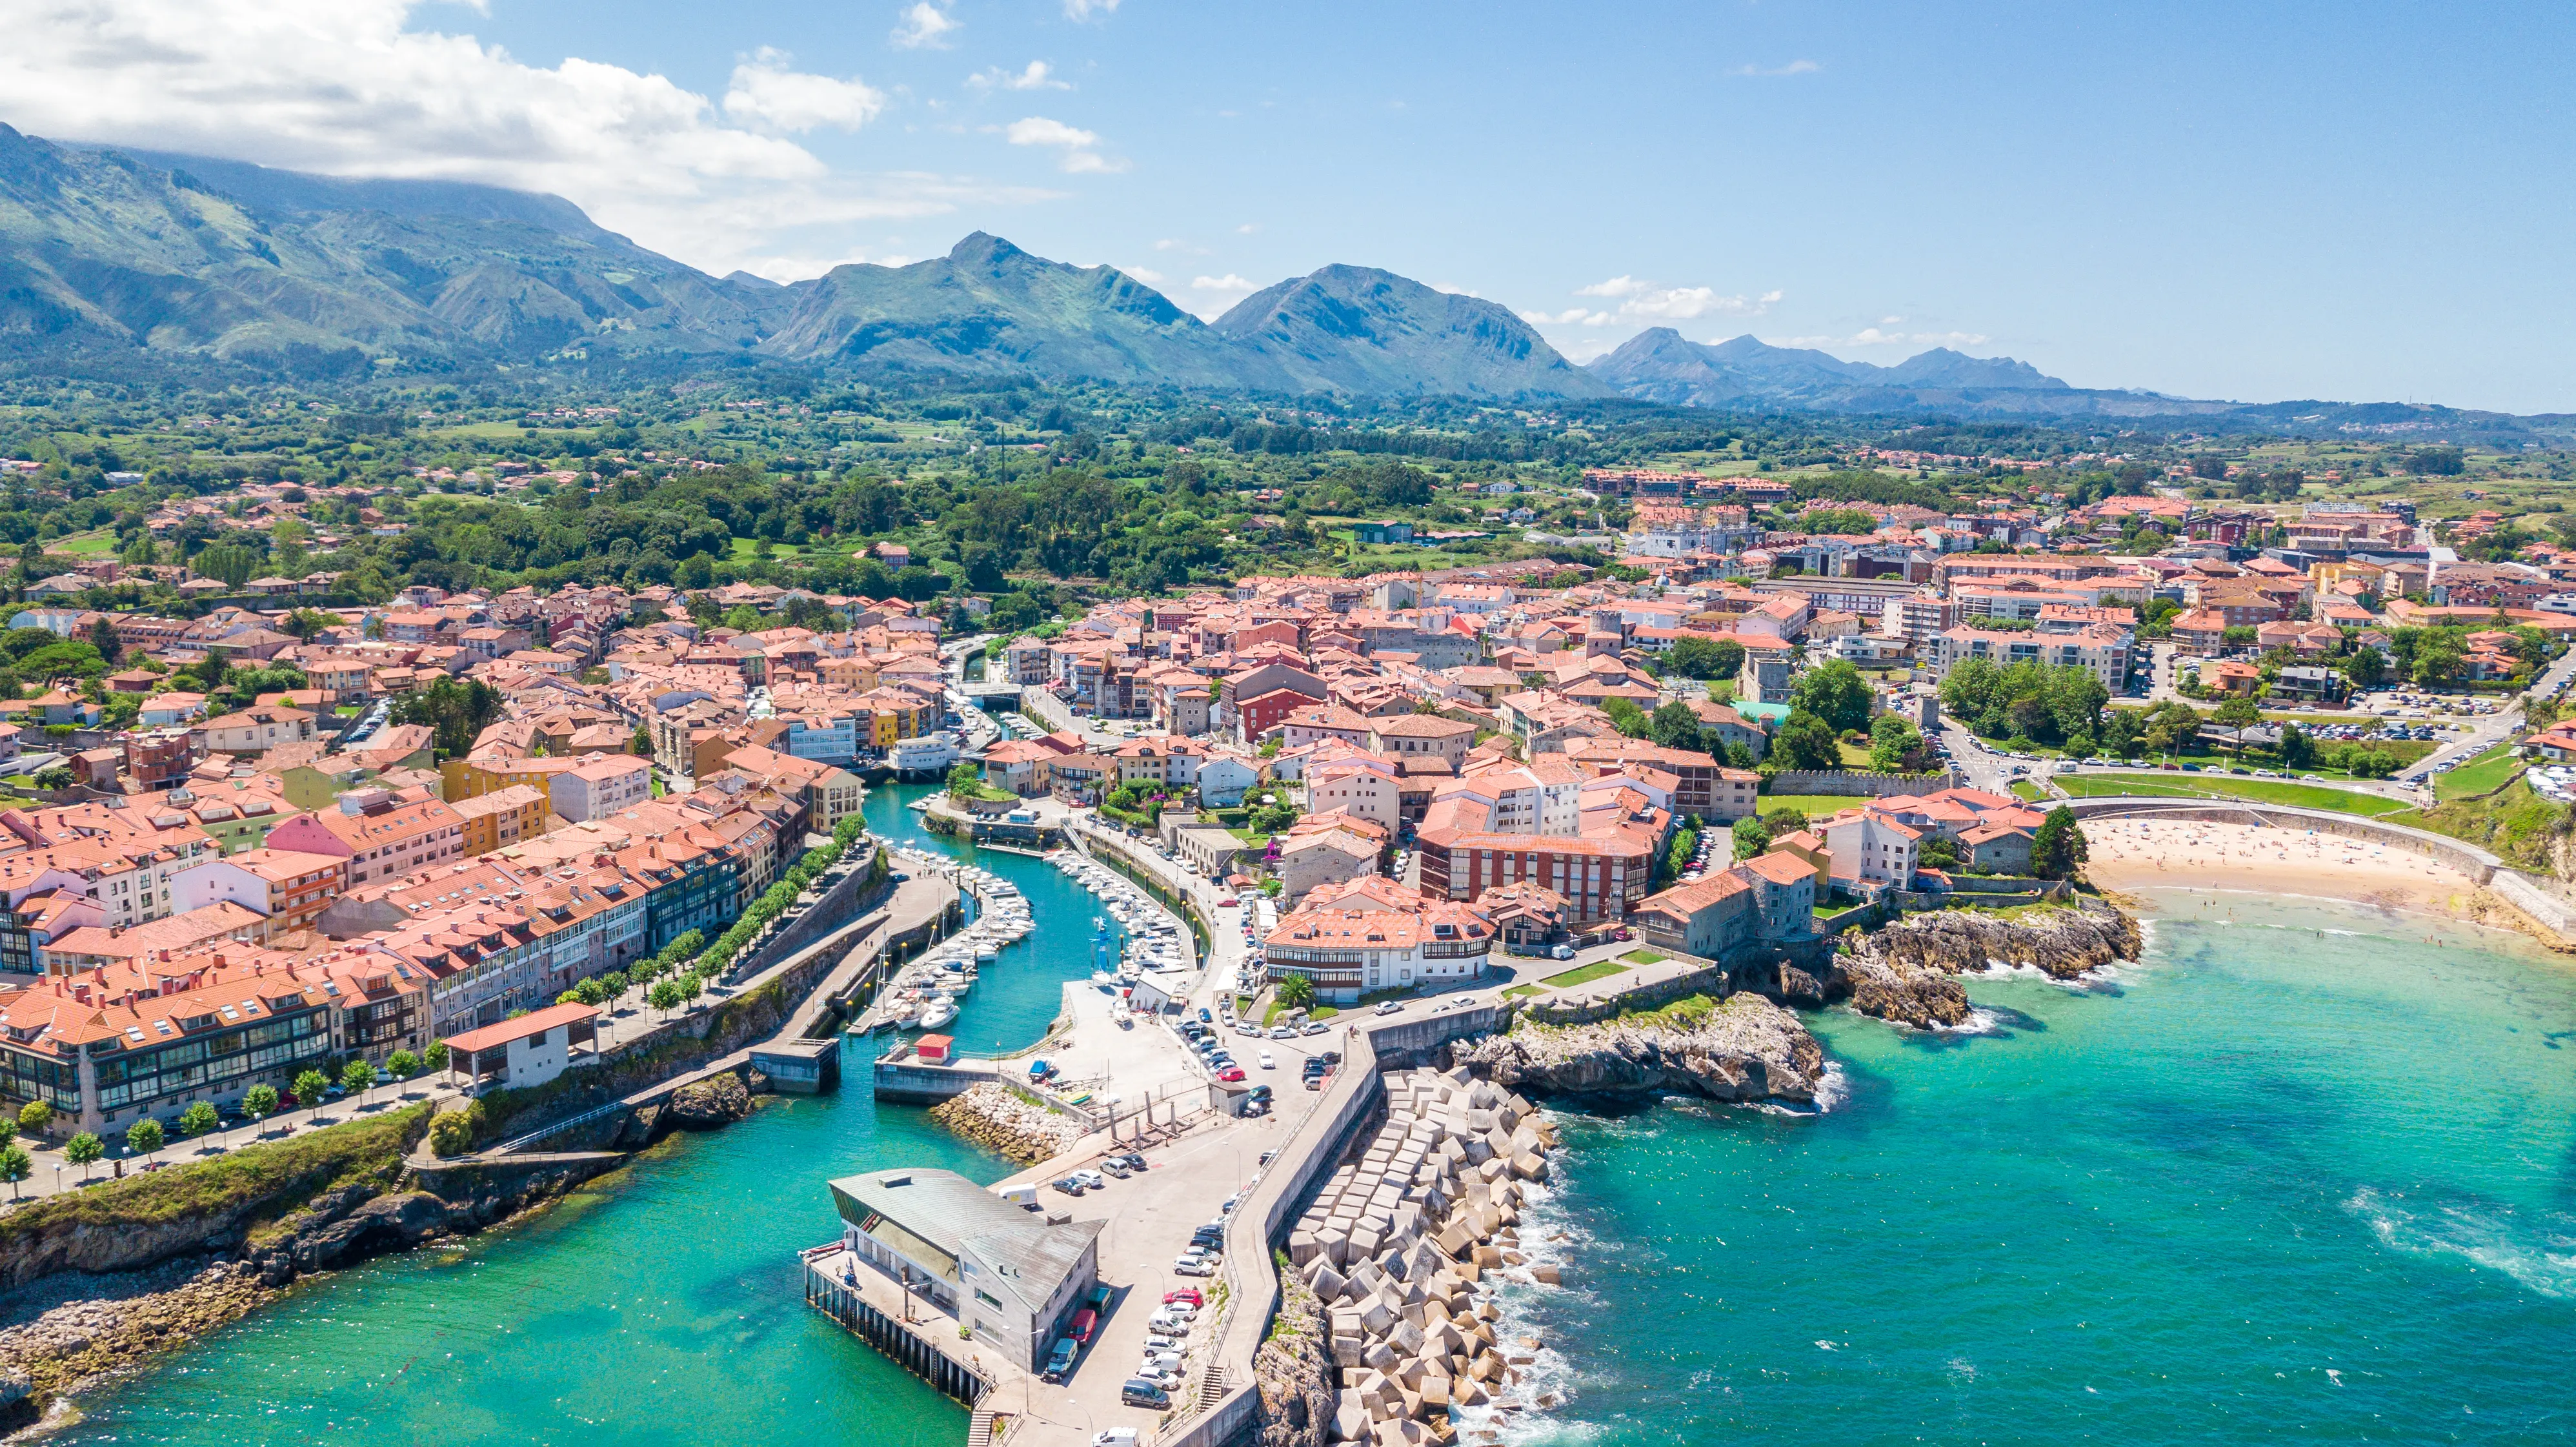 Llanes has been occupied since prehistoric times, with its walls dating back to 1206.